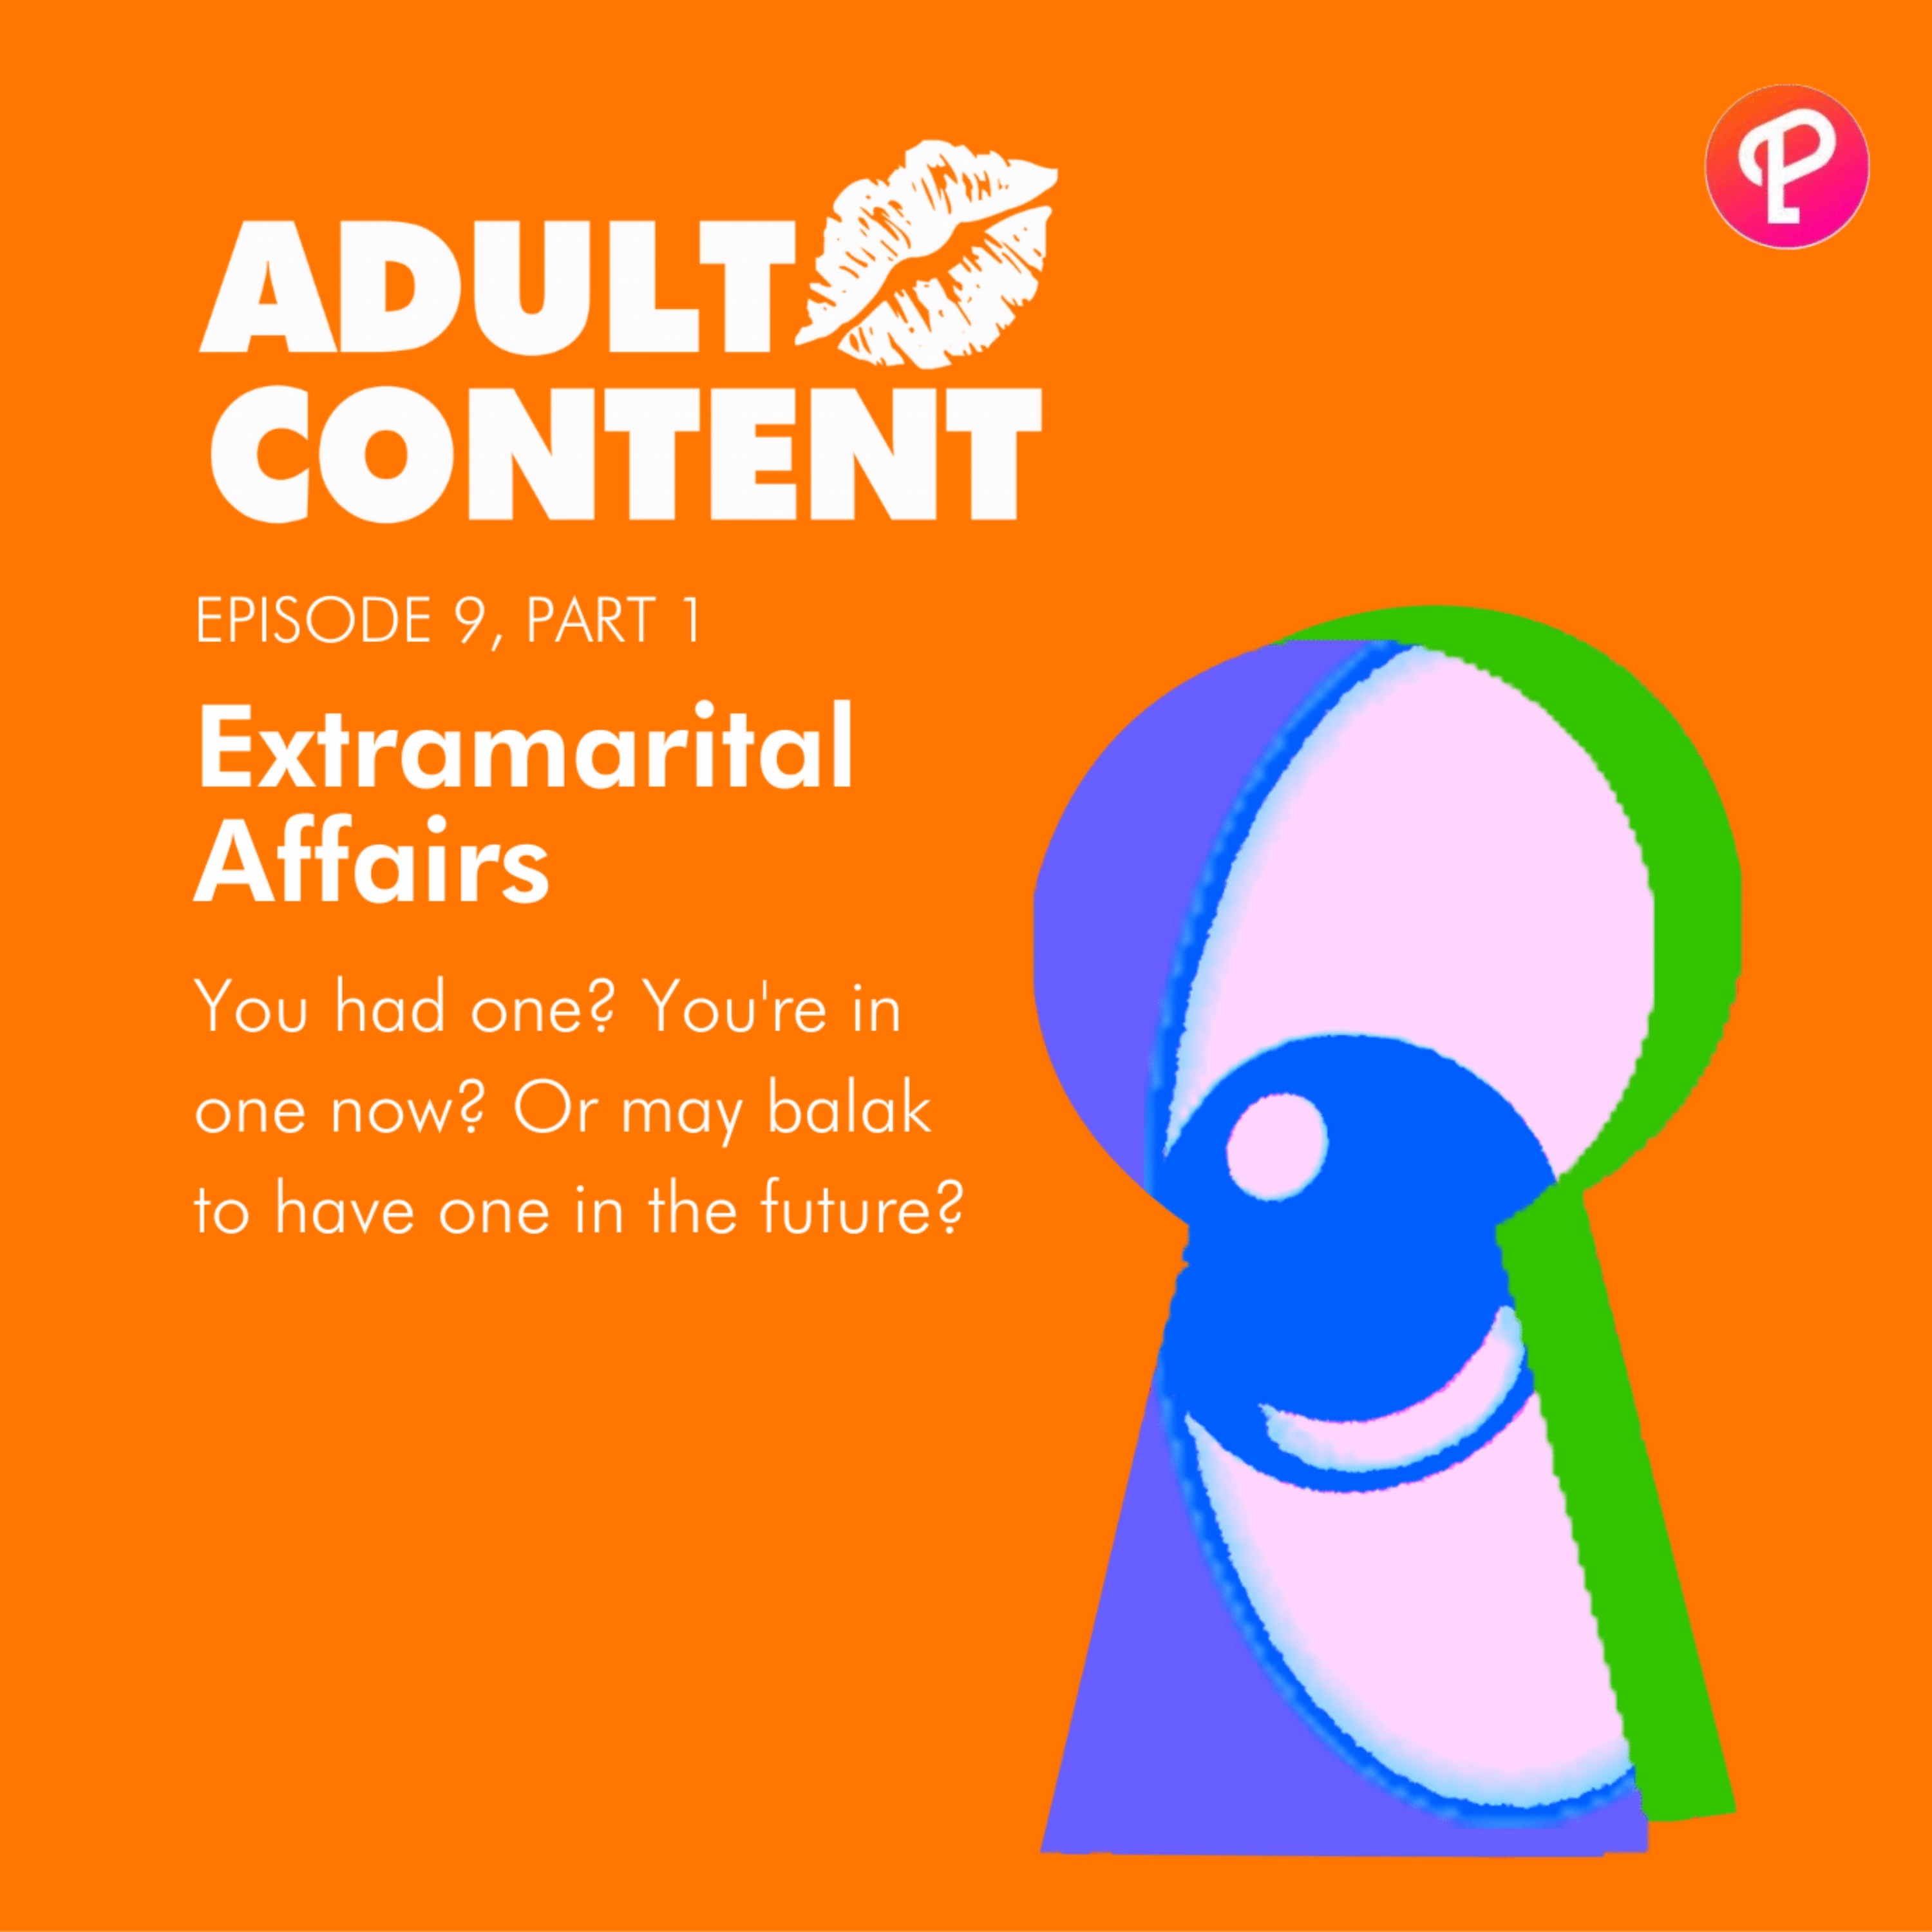 Ep. 9 Pt. 1: Extramarital Affairs: You had one? You're in one now? Or may balak to have one in the future?